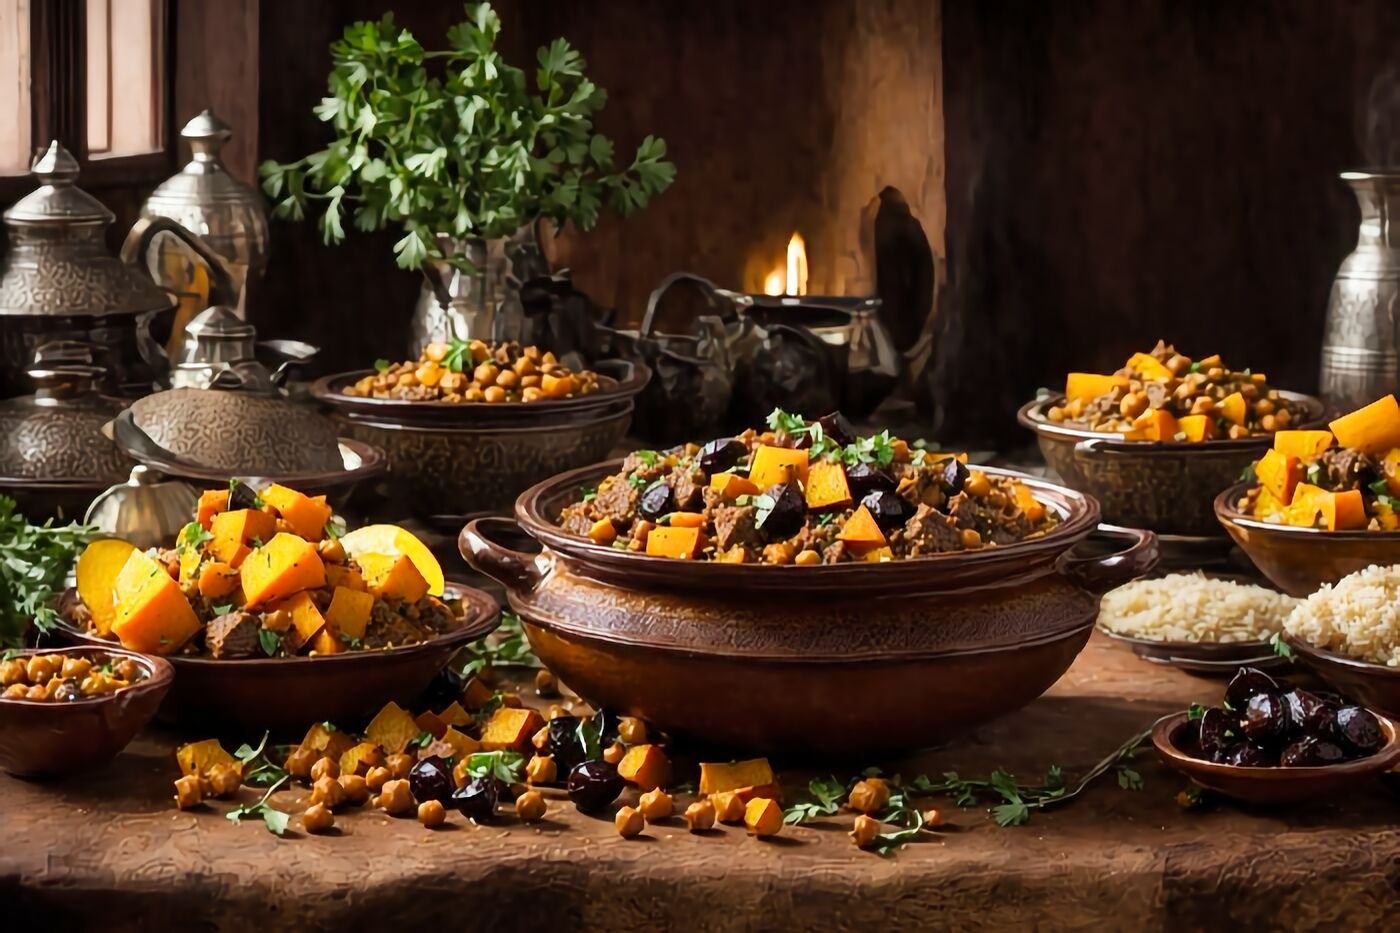 Beef Moroccan Tagine with Squash, Sticky Prunes, and Chickpeas